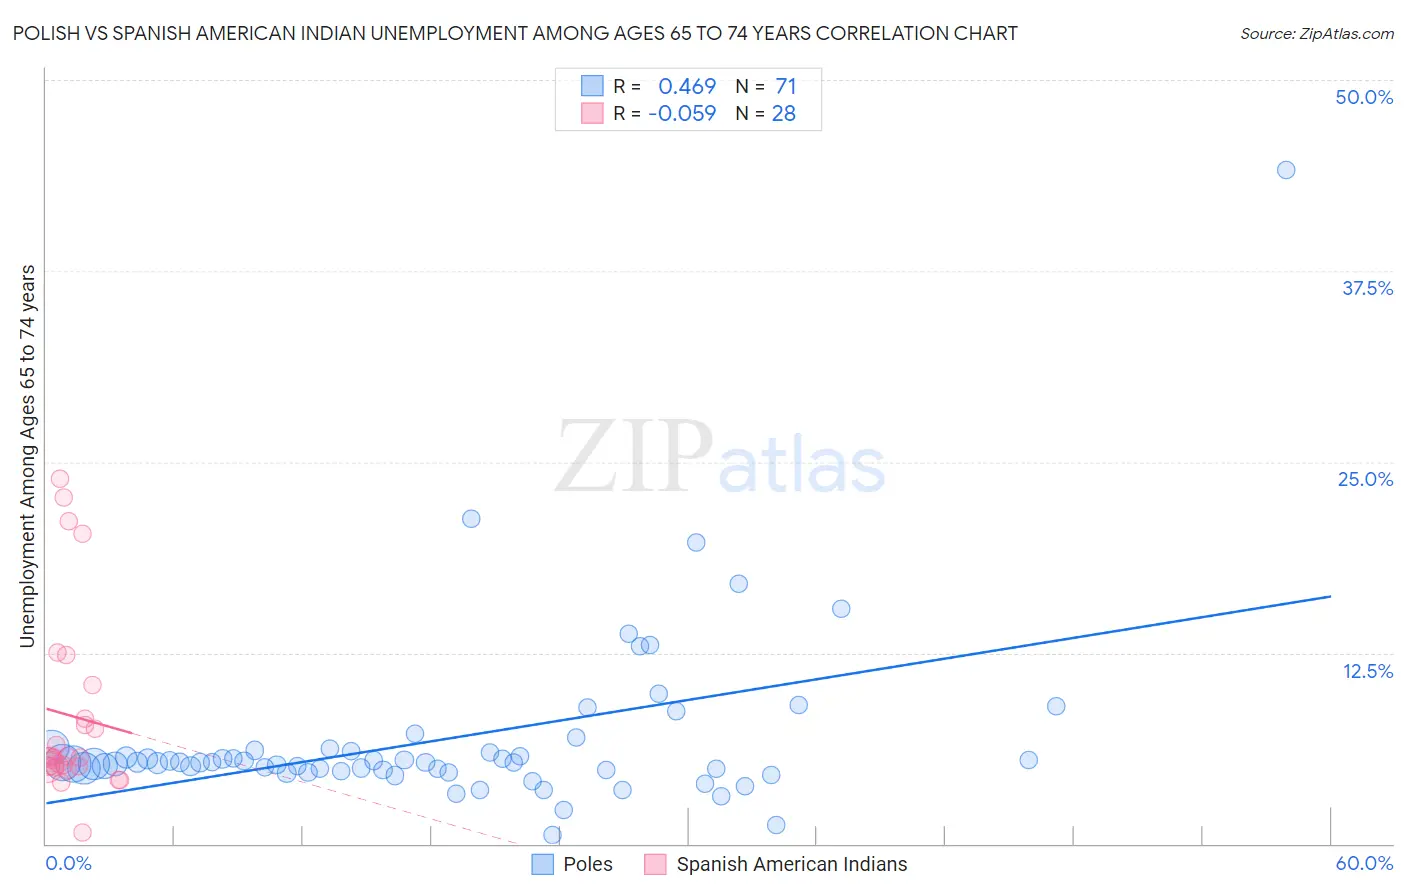 Polish vs Spanish American Indian Unemployment Among Ages 65 to 74 years